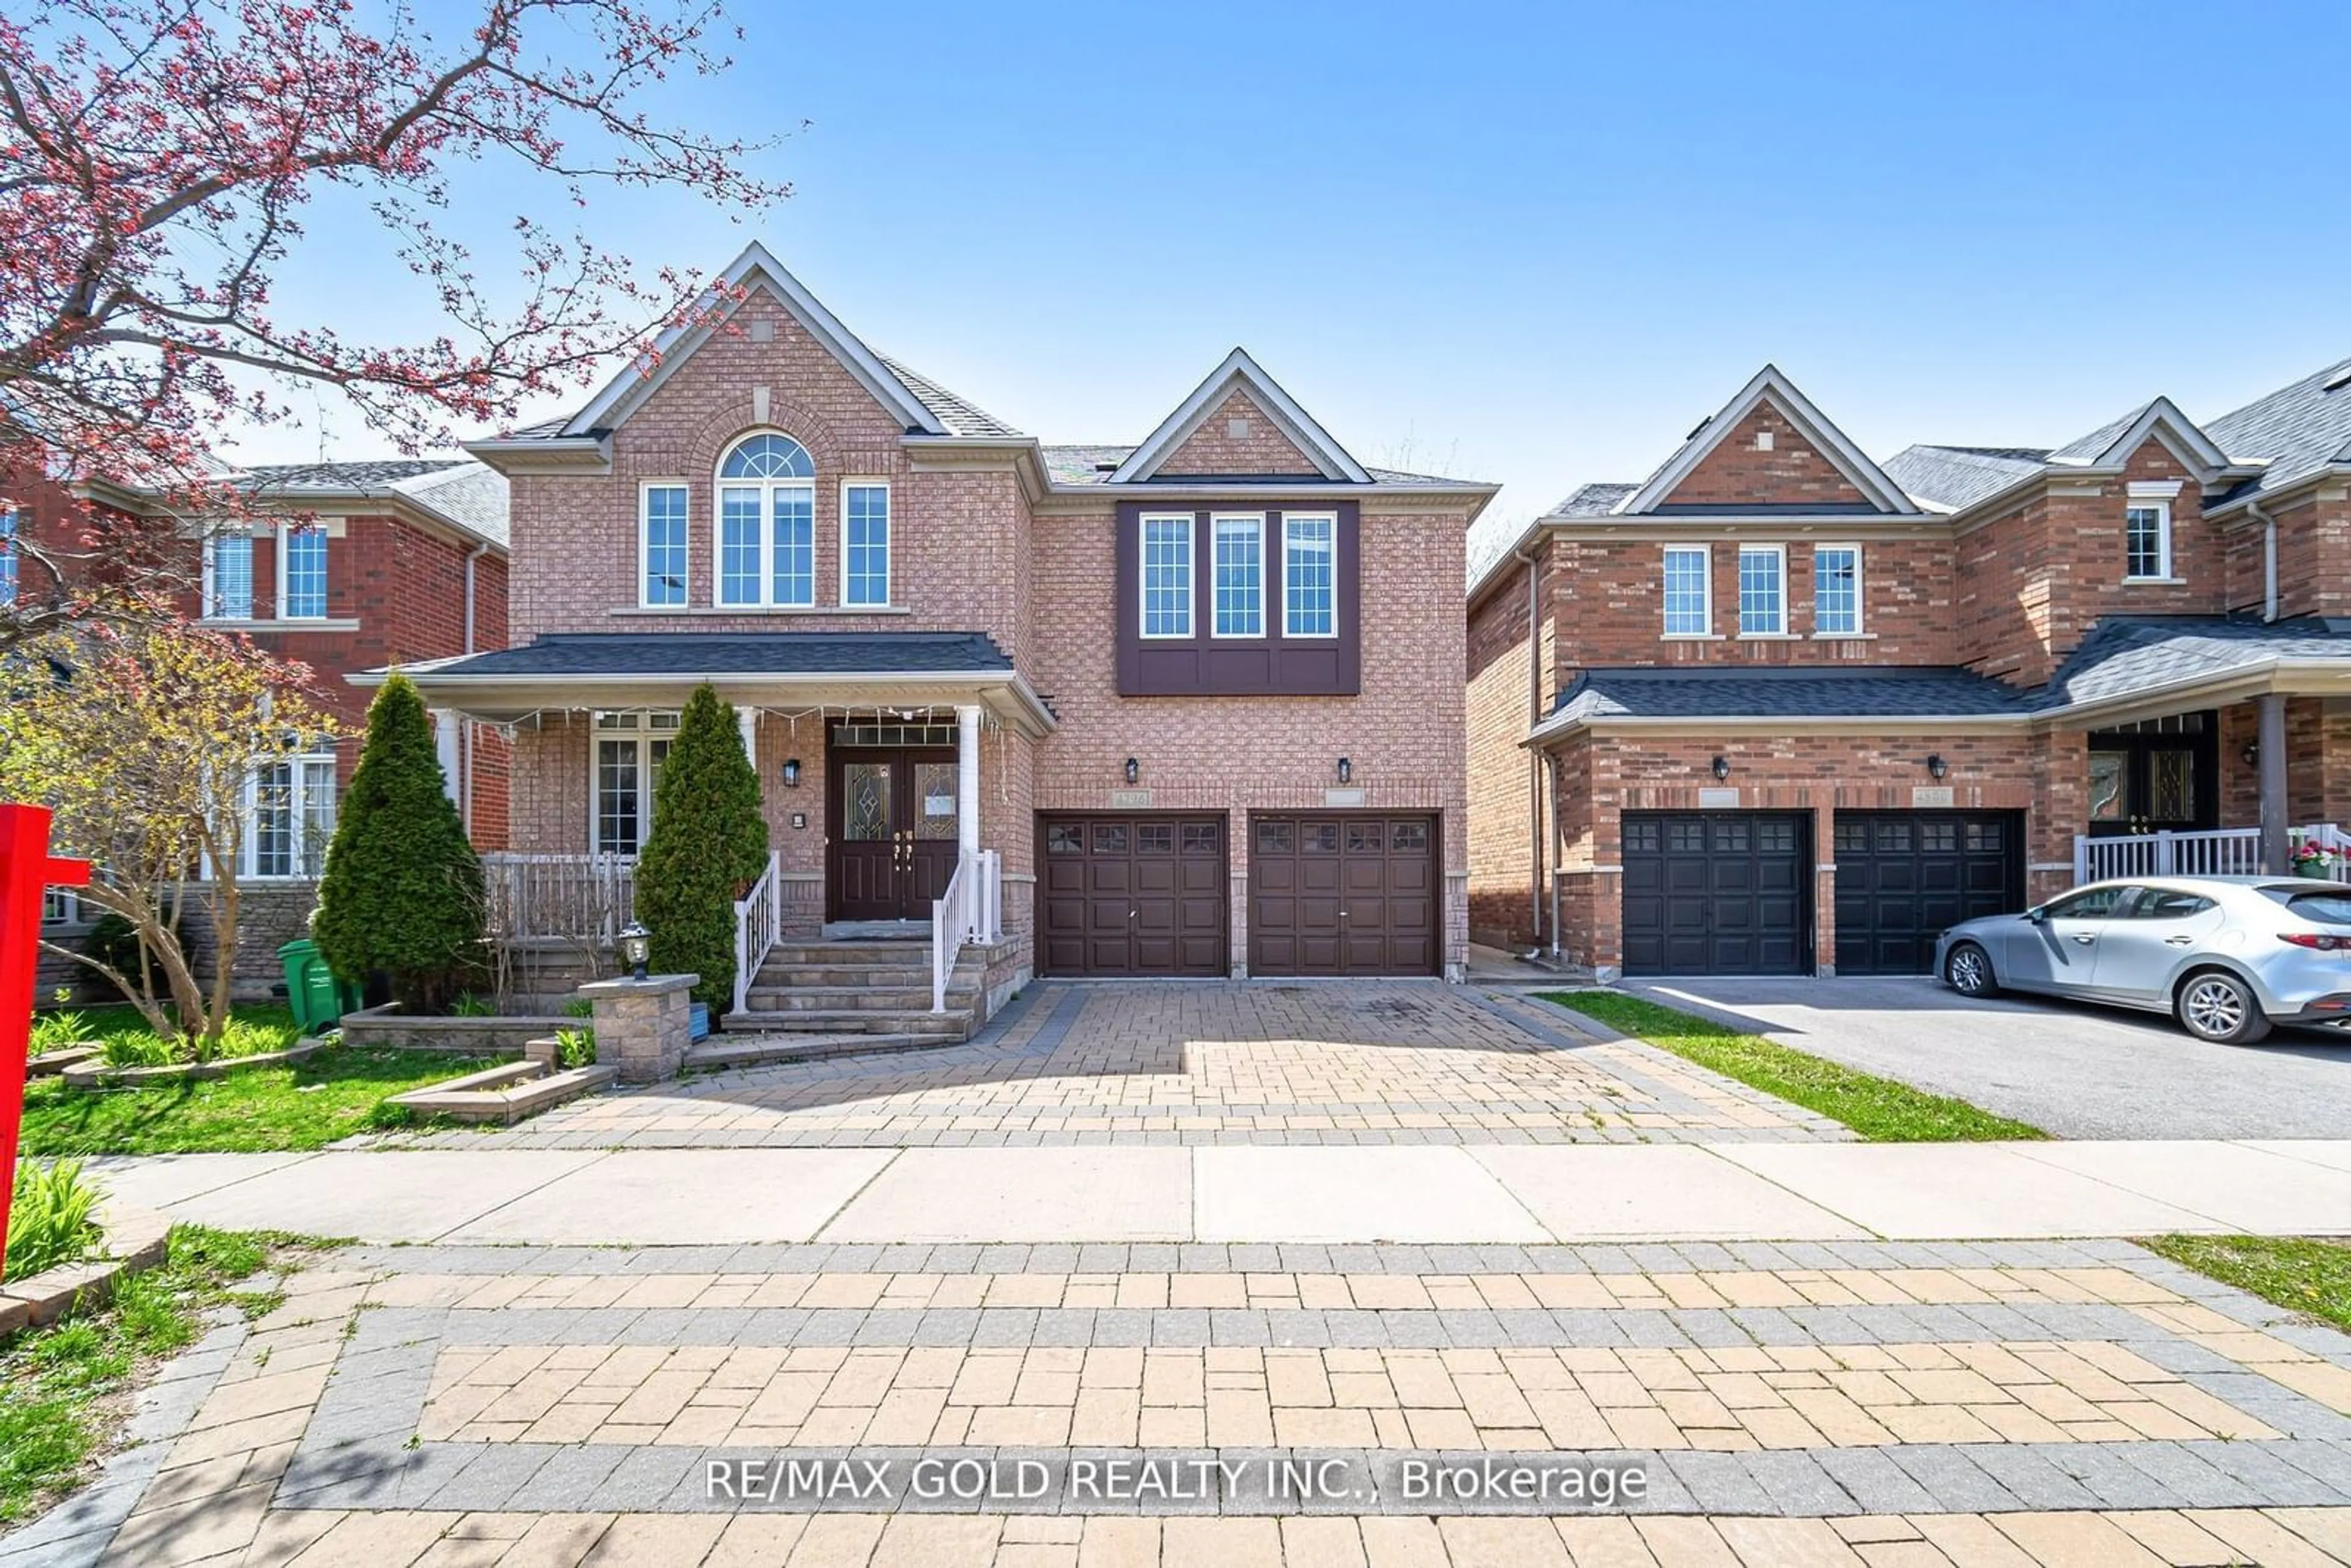 Home with brick exterior material for 4796 Fulwell Rd, Mississauga Ontario L5M 7J7